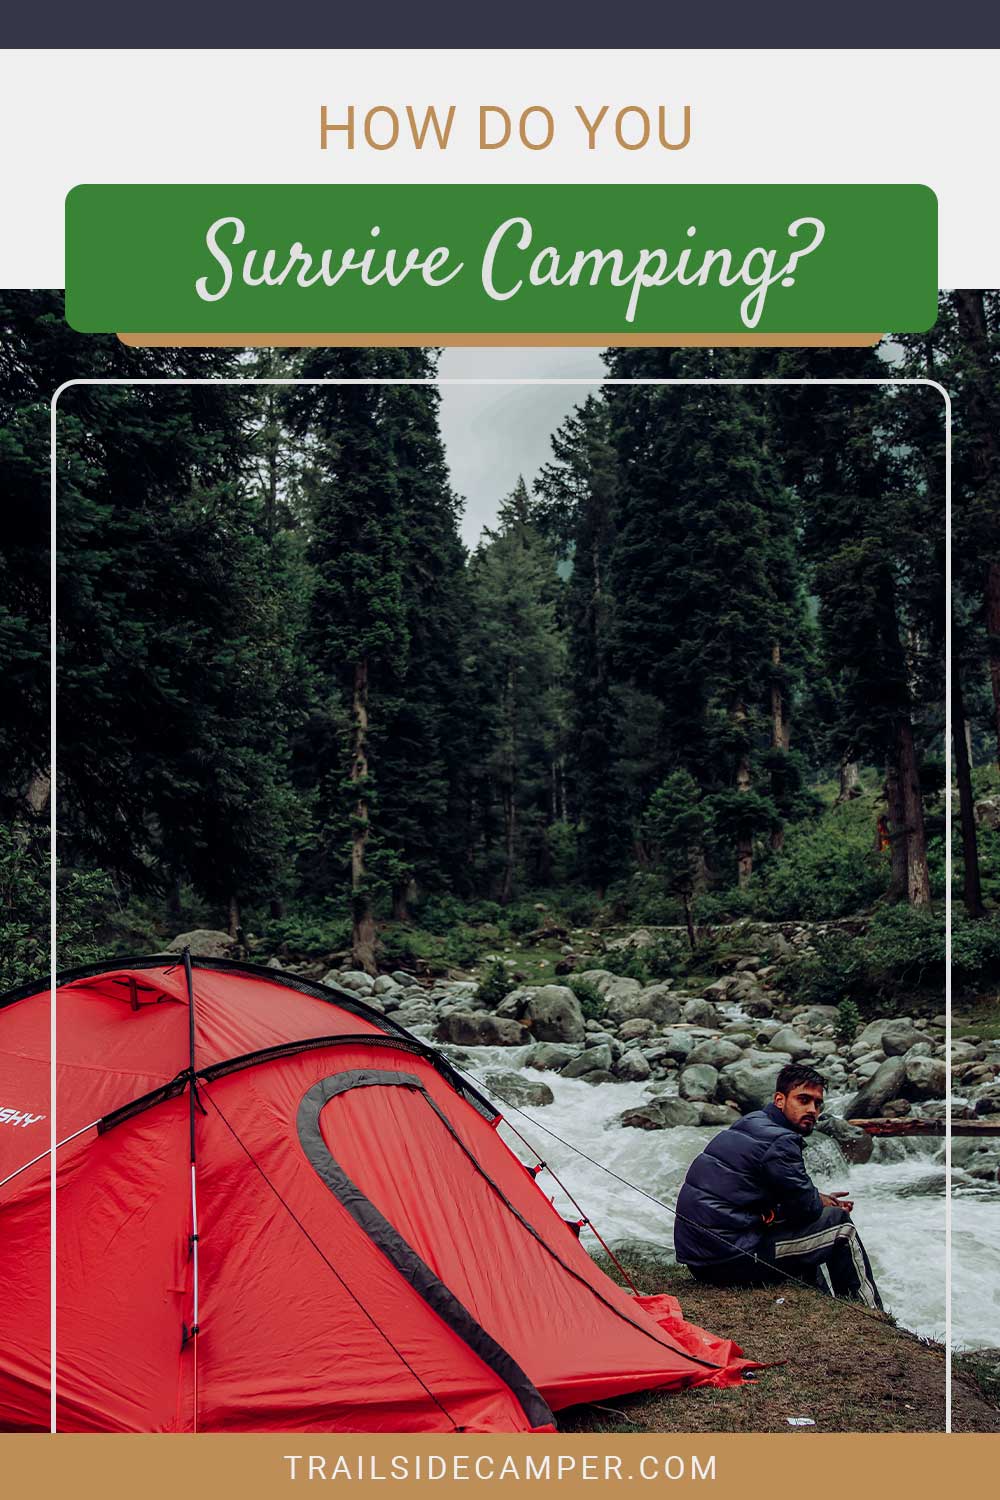 How Do You Survive Camping?